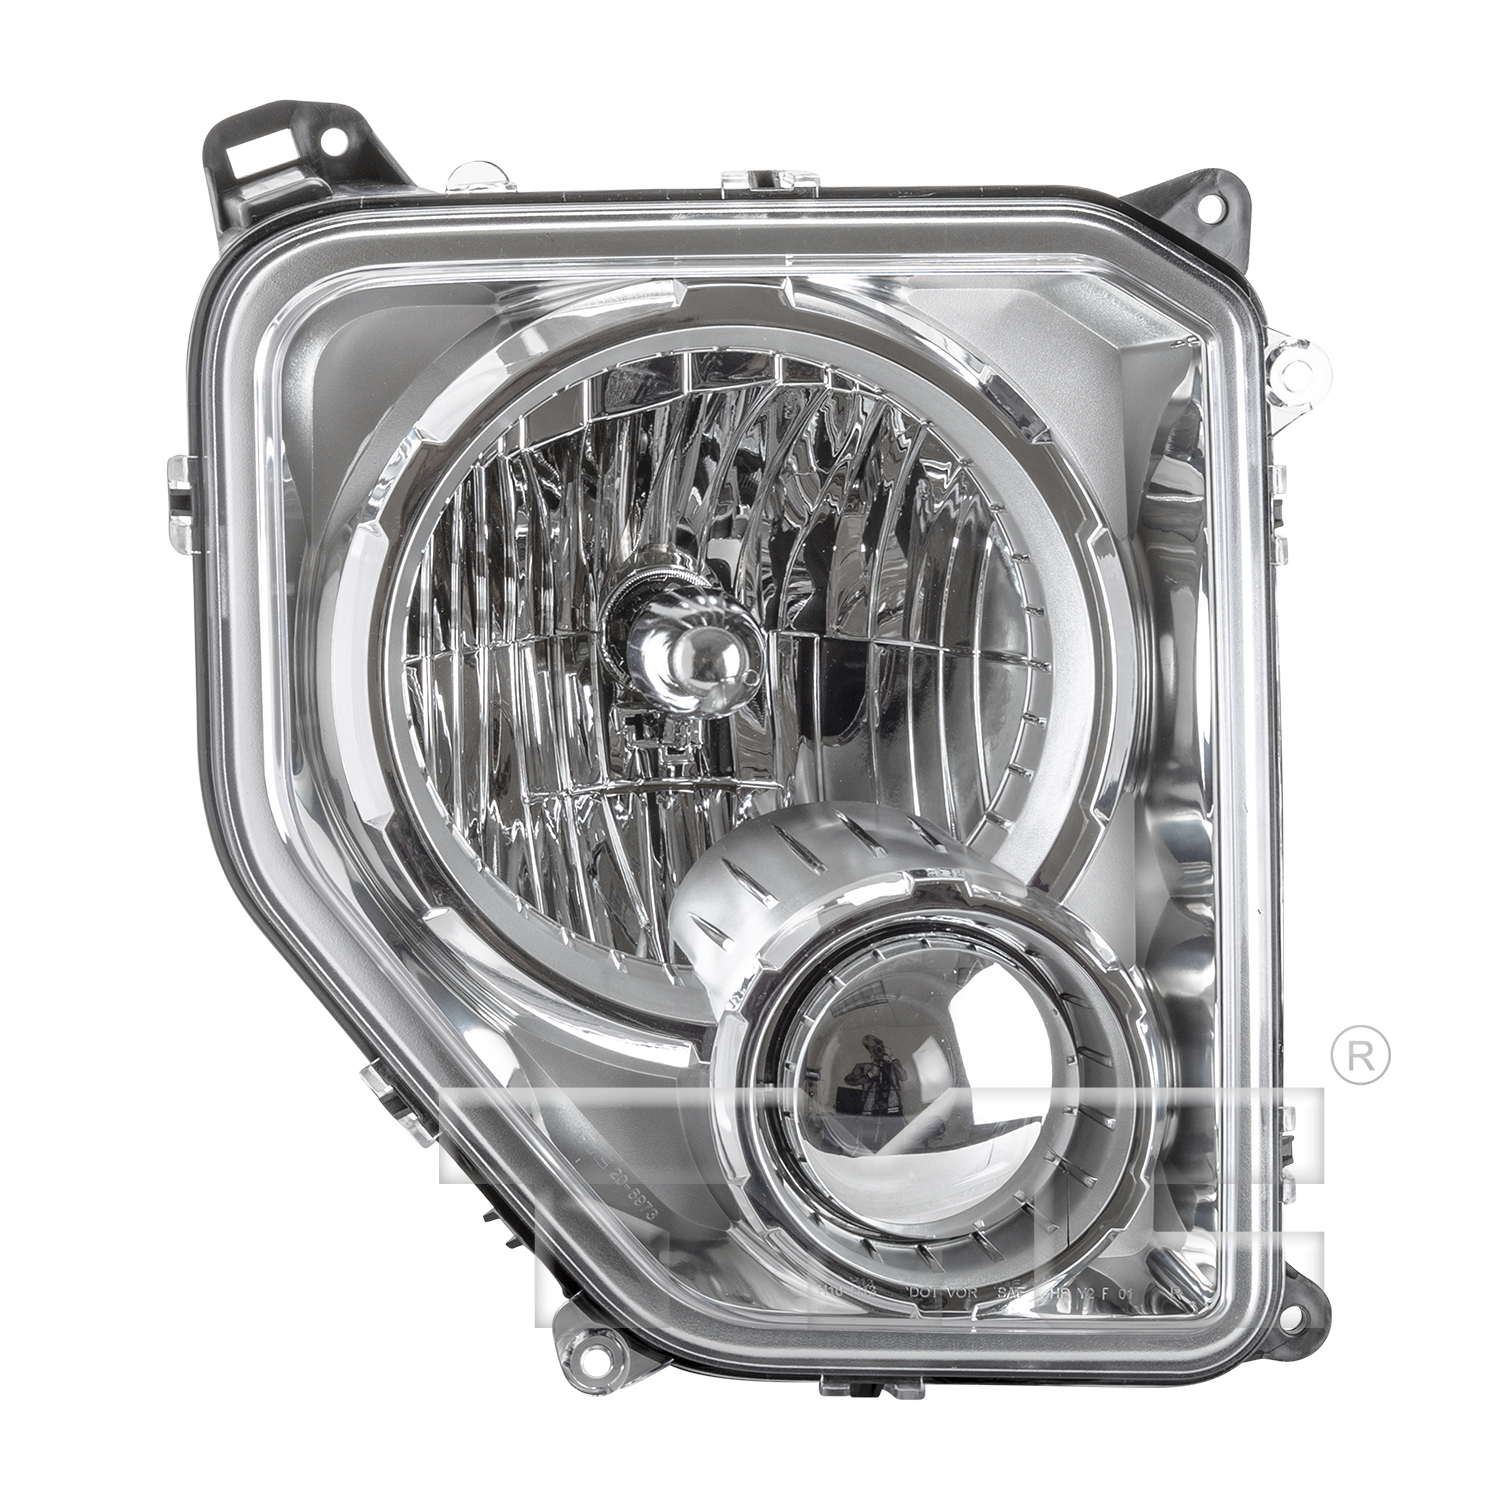 Aftermarket HEADLIGHTS for JEEP - LIBERTY, LIBERTY,10-12,RT Headlamp assy composite